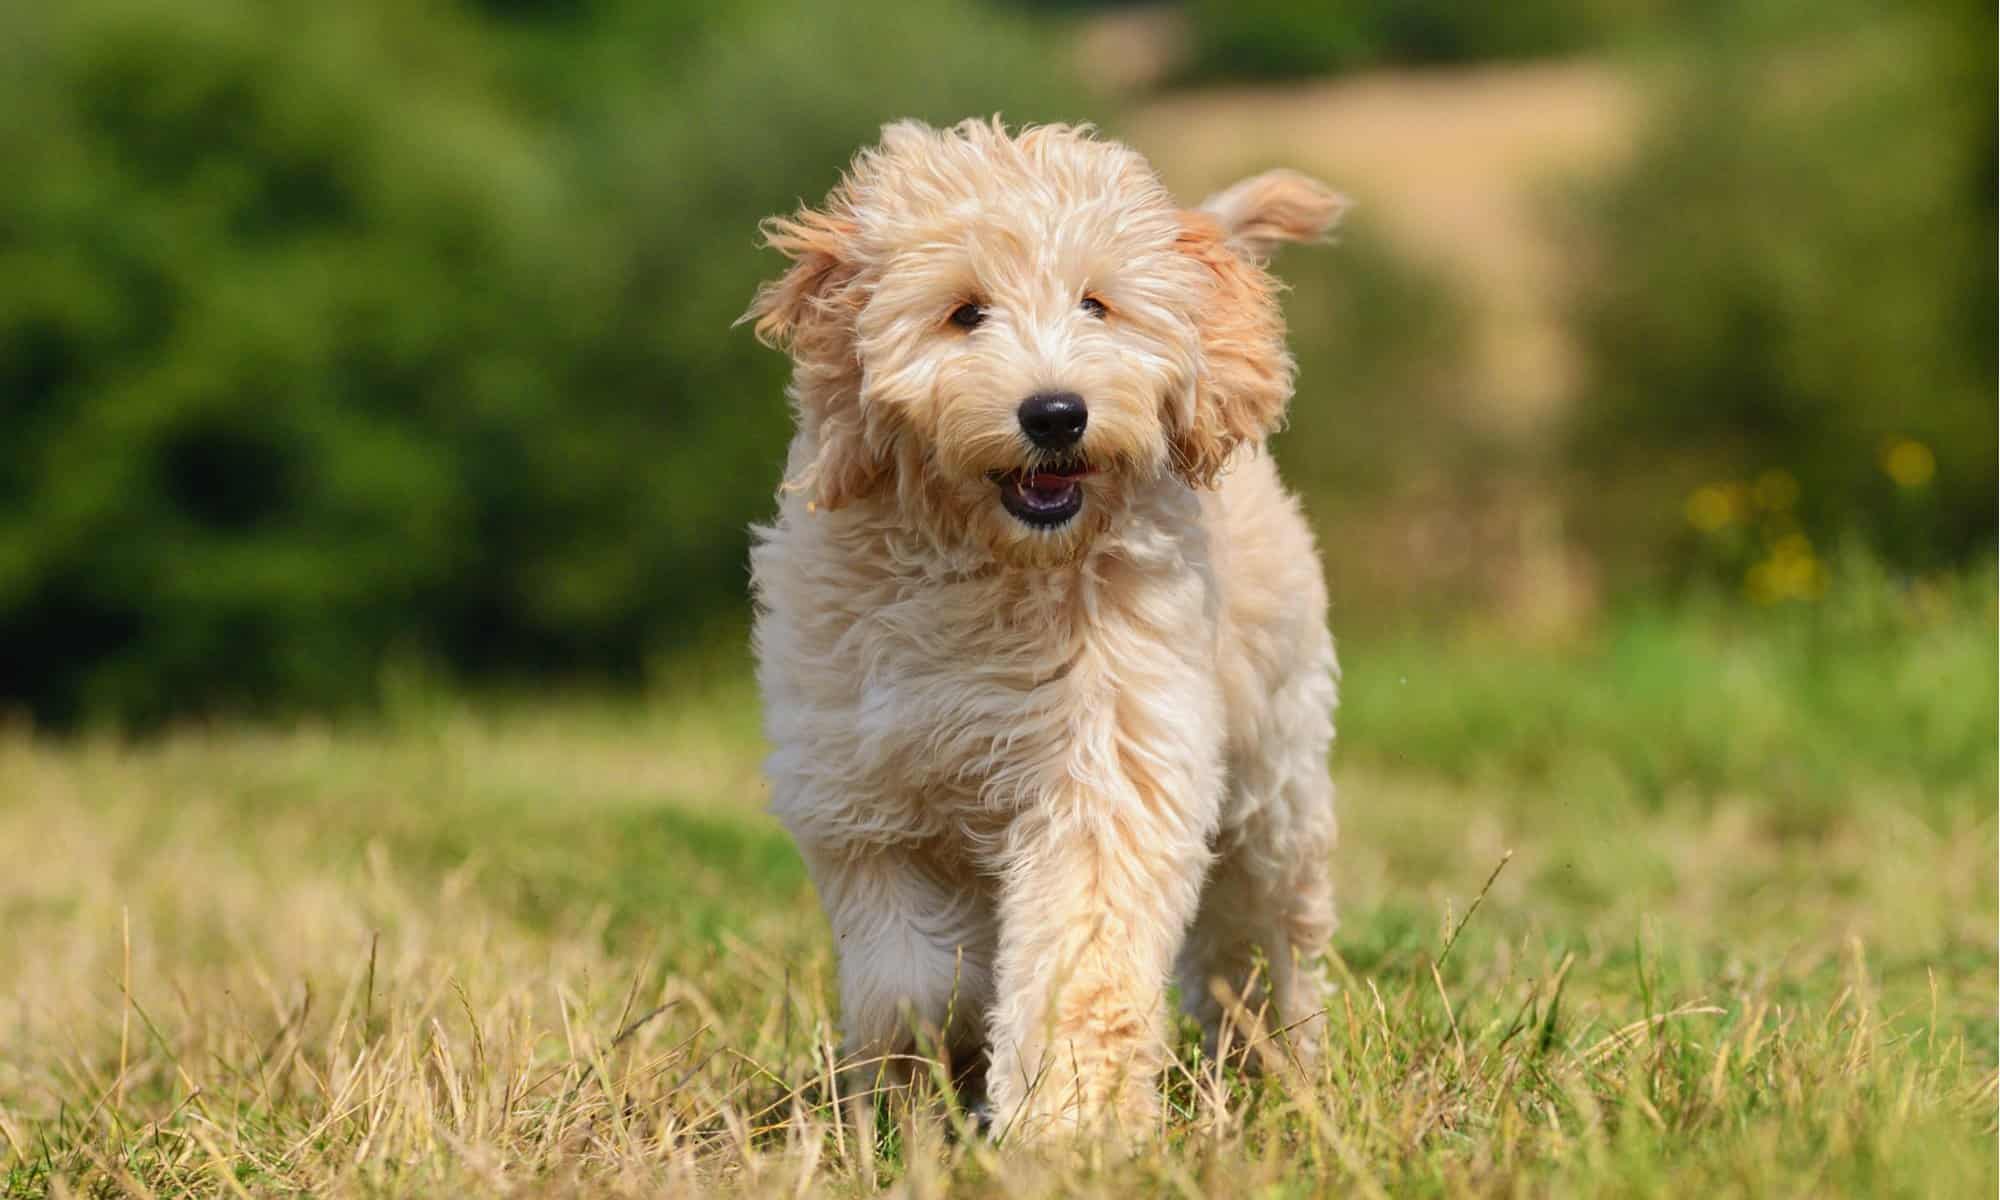 F1 vs F1B vs F2 Goldendoodle: Is There a Difference?